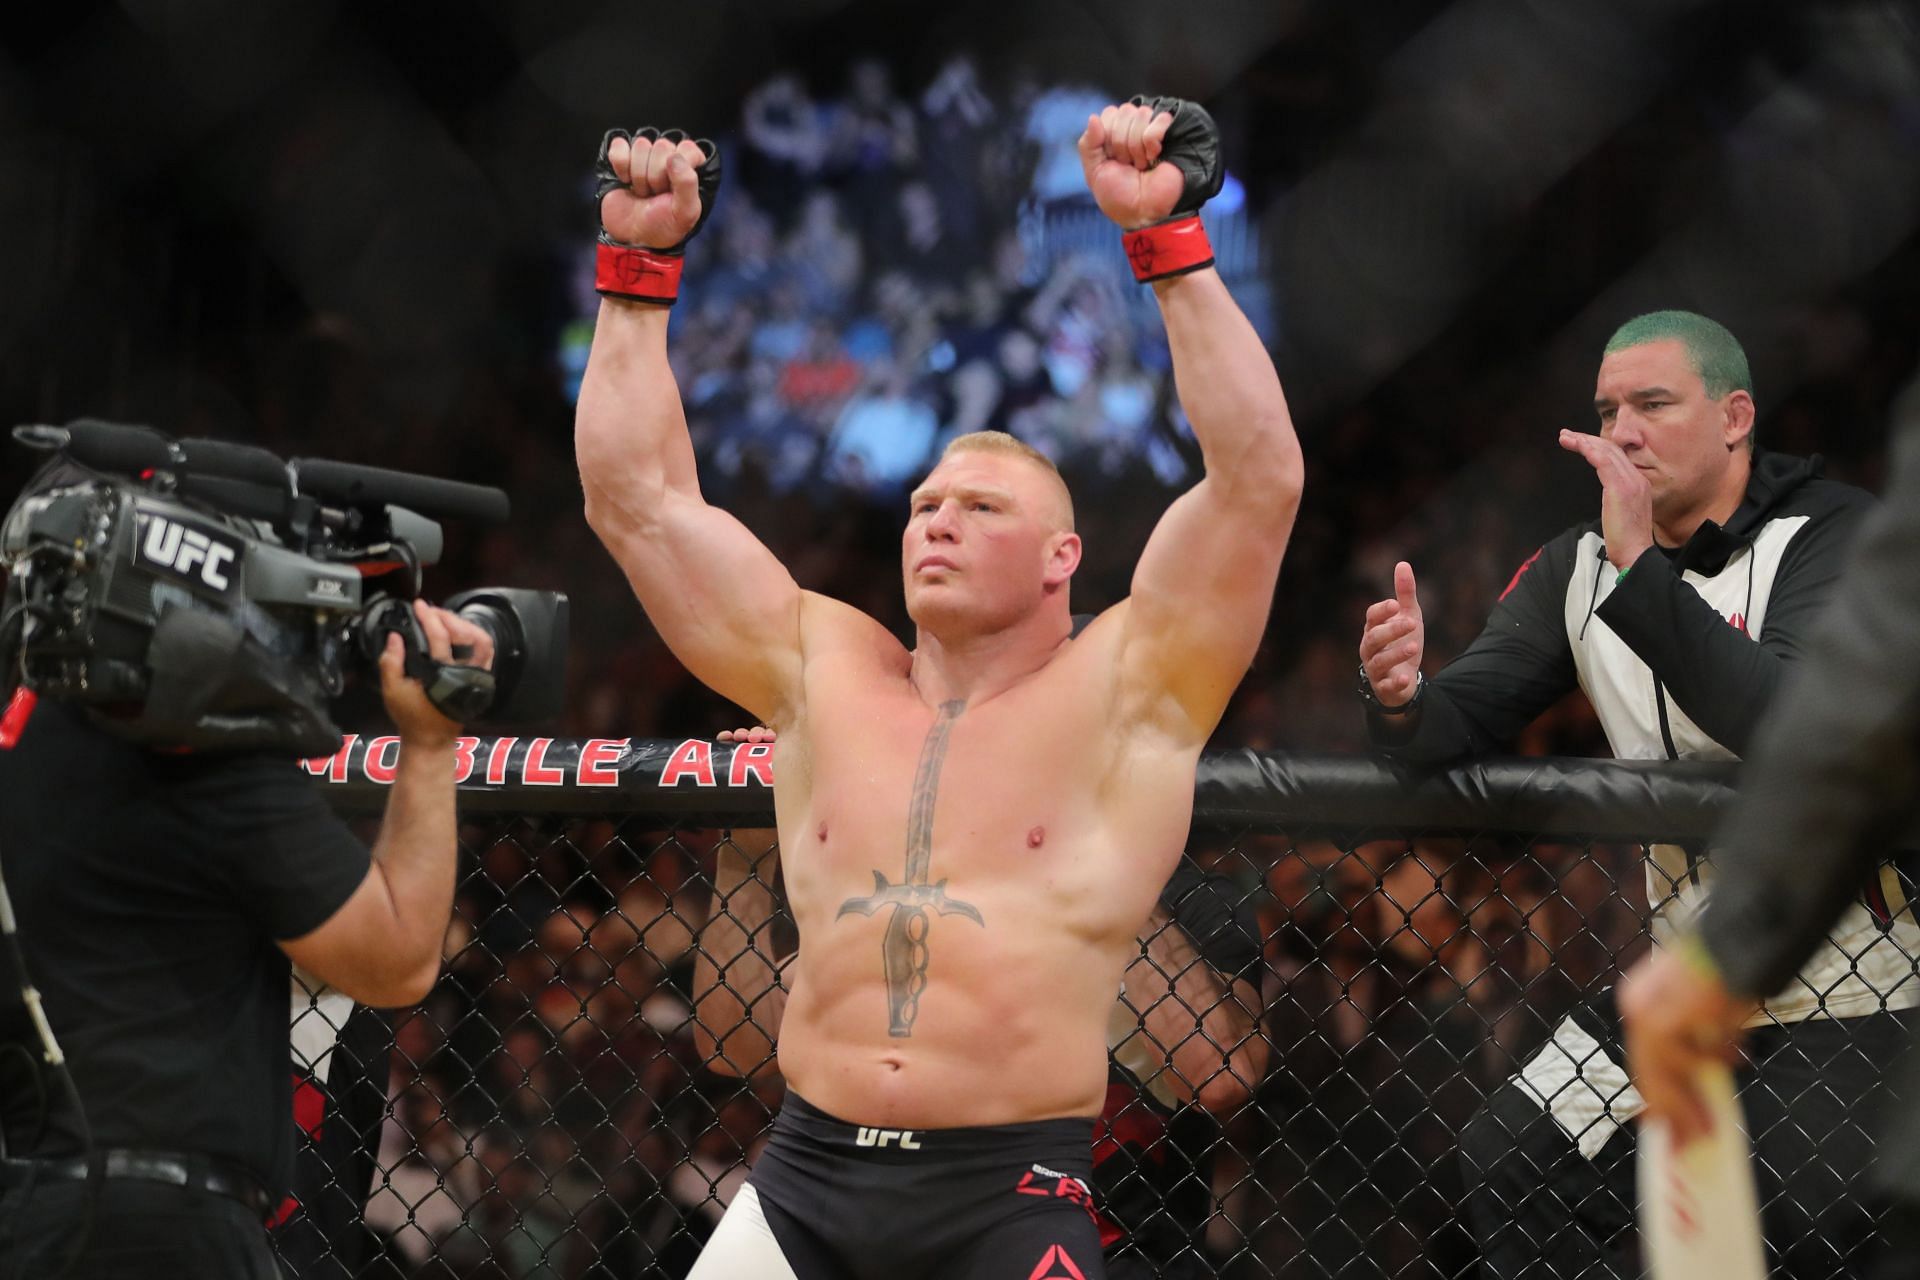 Lesnar defeated Carwin via second-round submission